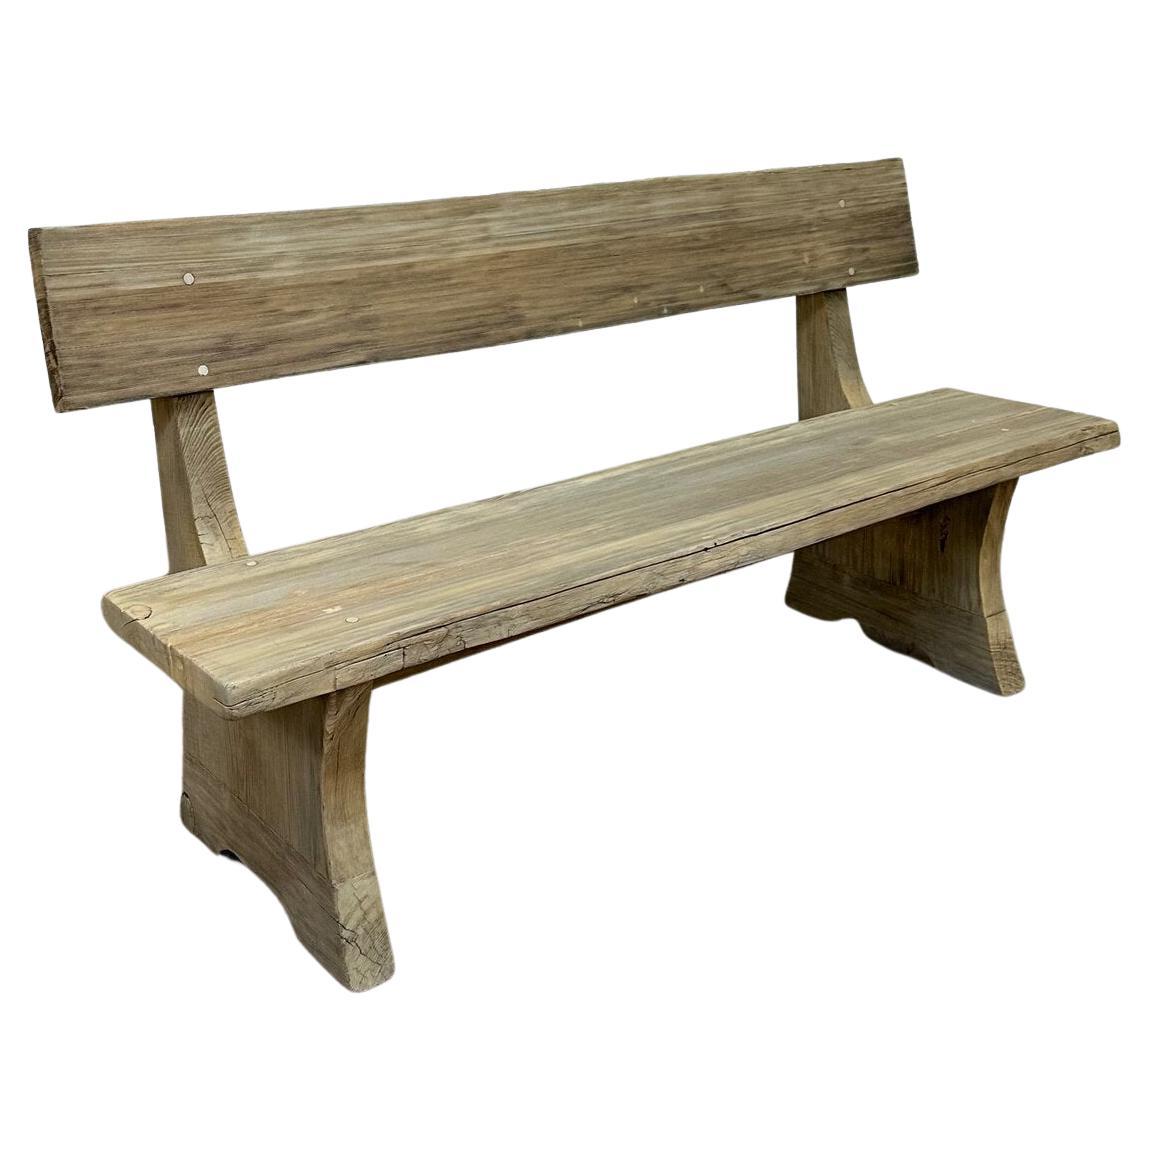 Rustic Solid oak benches -sold separately For Sale